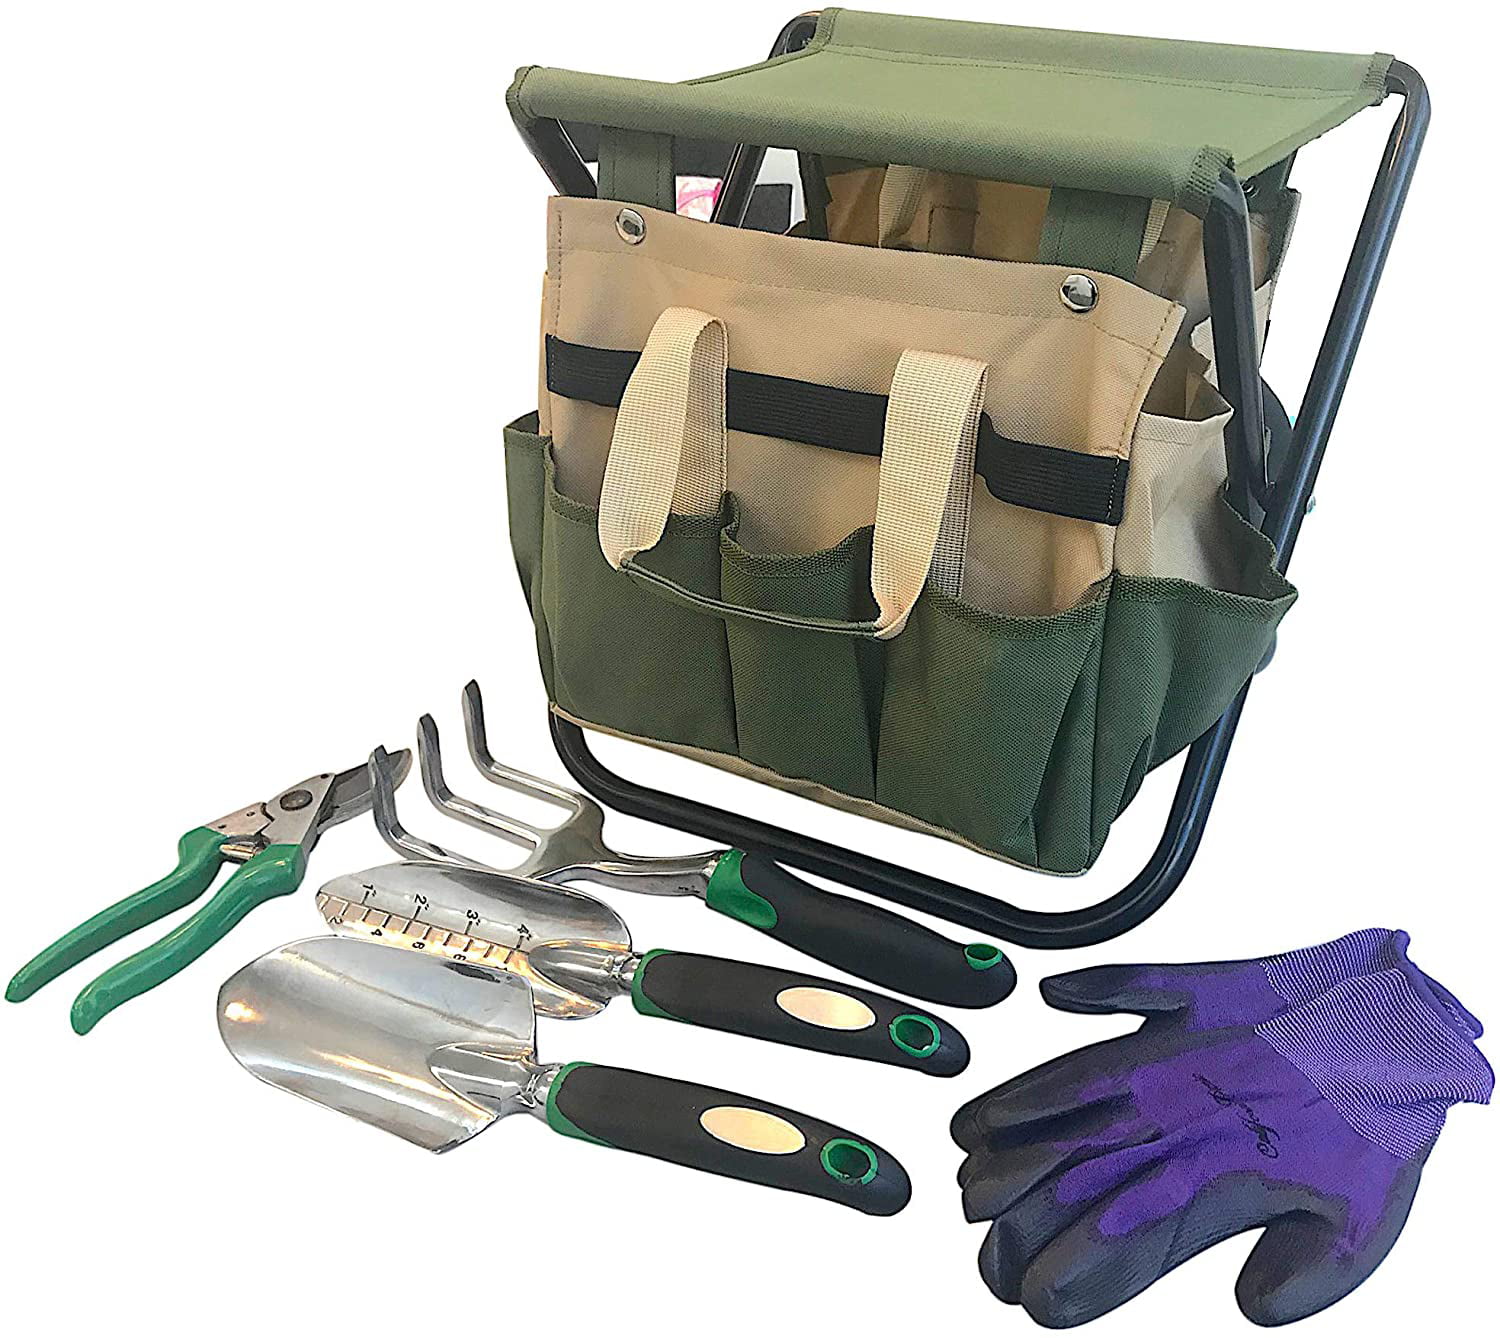 Gifts for Lover,Elder or Kid 11Pcs Heavy Duty Gardening Hand Tools,Extra Succulent Tools Set Aluminum with Soft Rubberized Non-Slip Handle Tools FOLNG Garden Tool Set Durable Storage Tote Bag